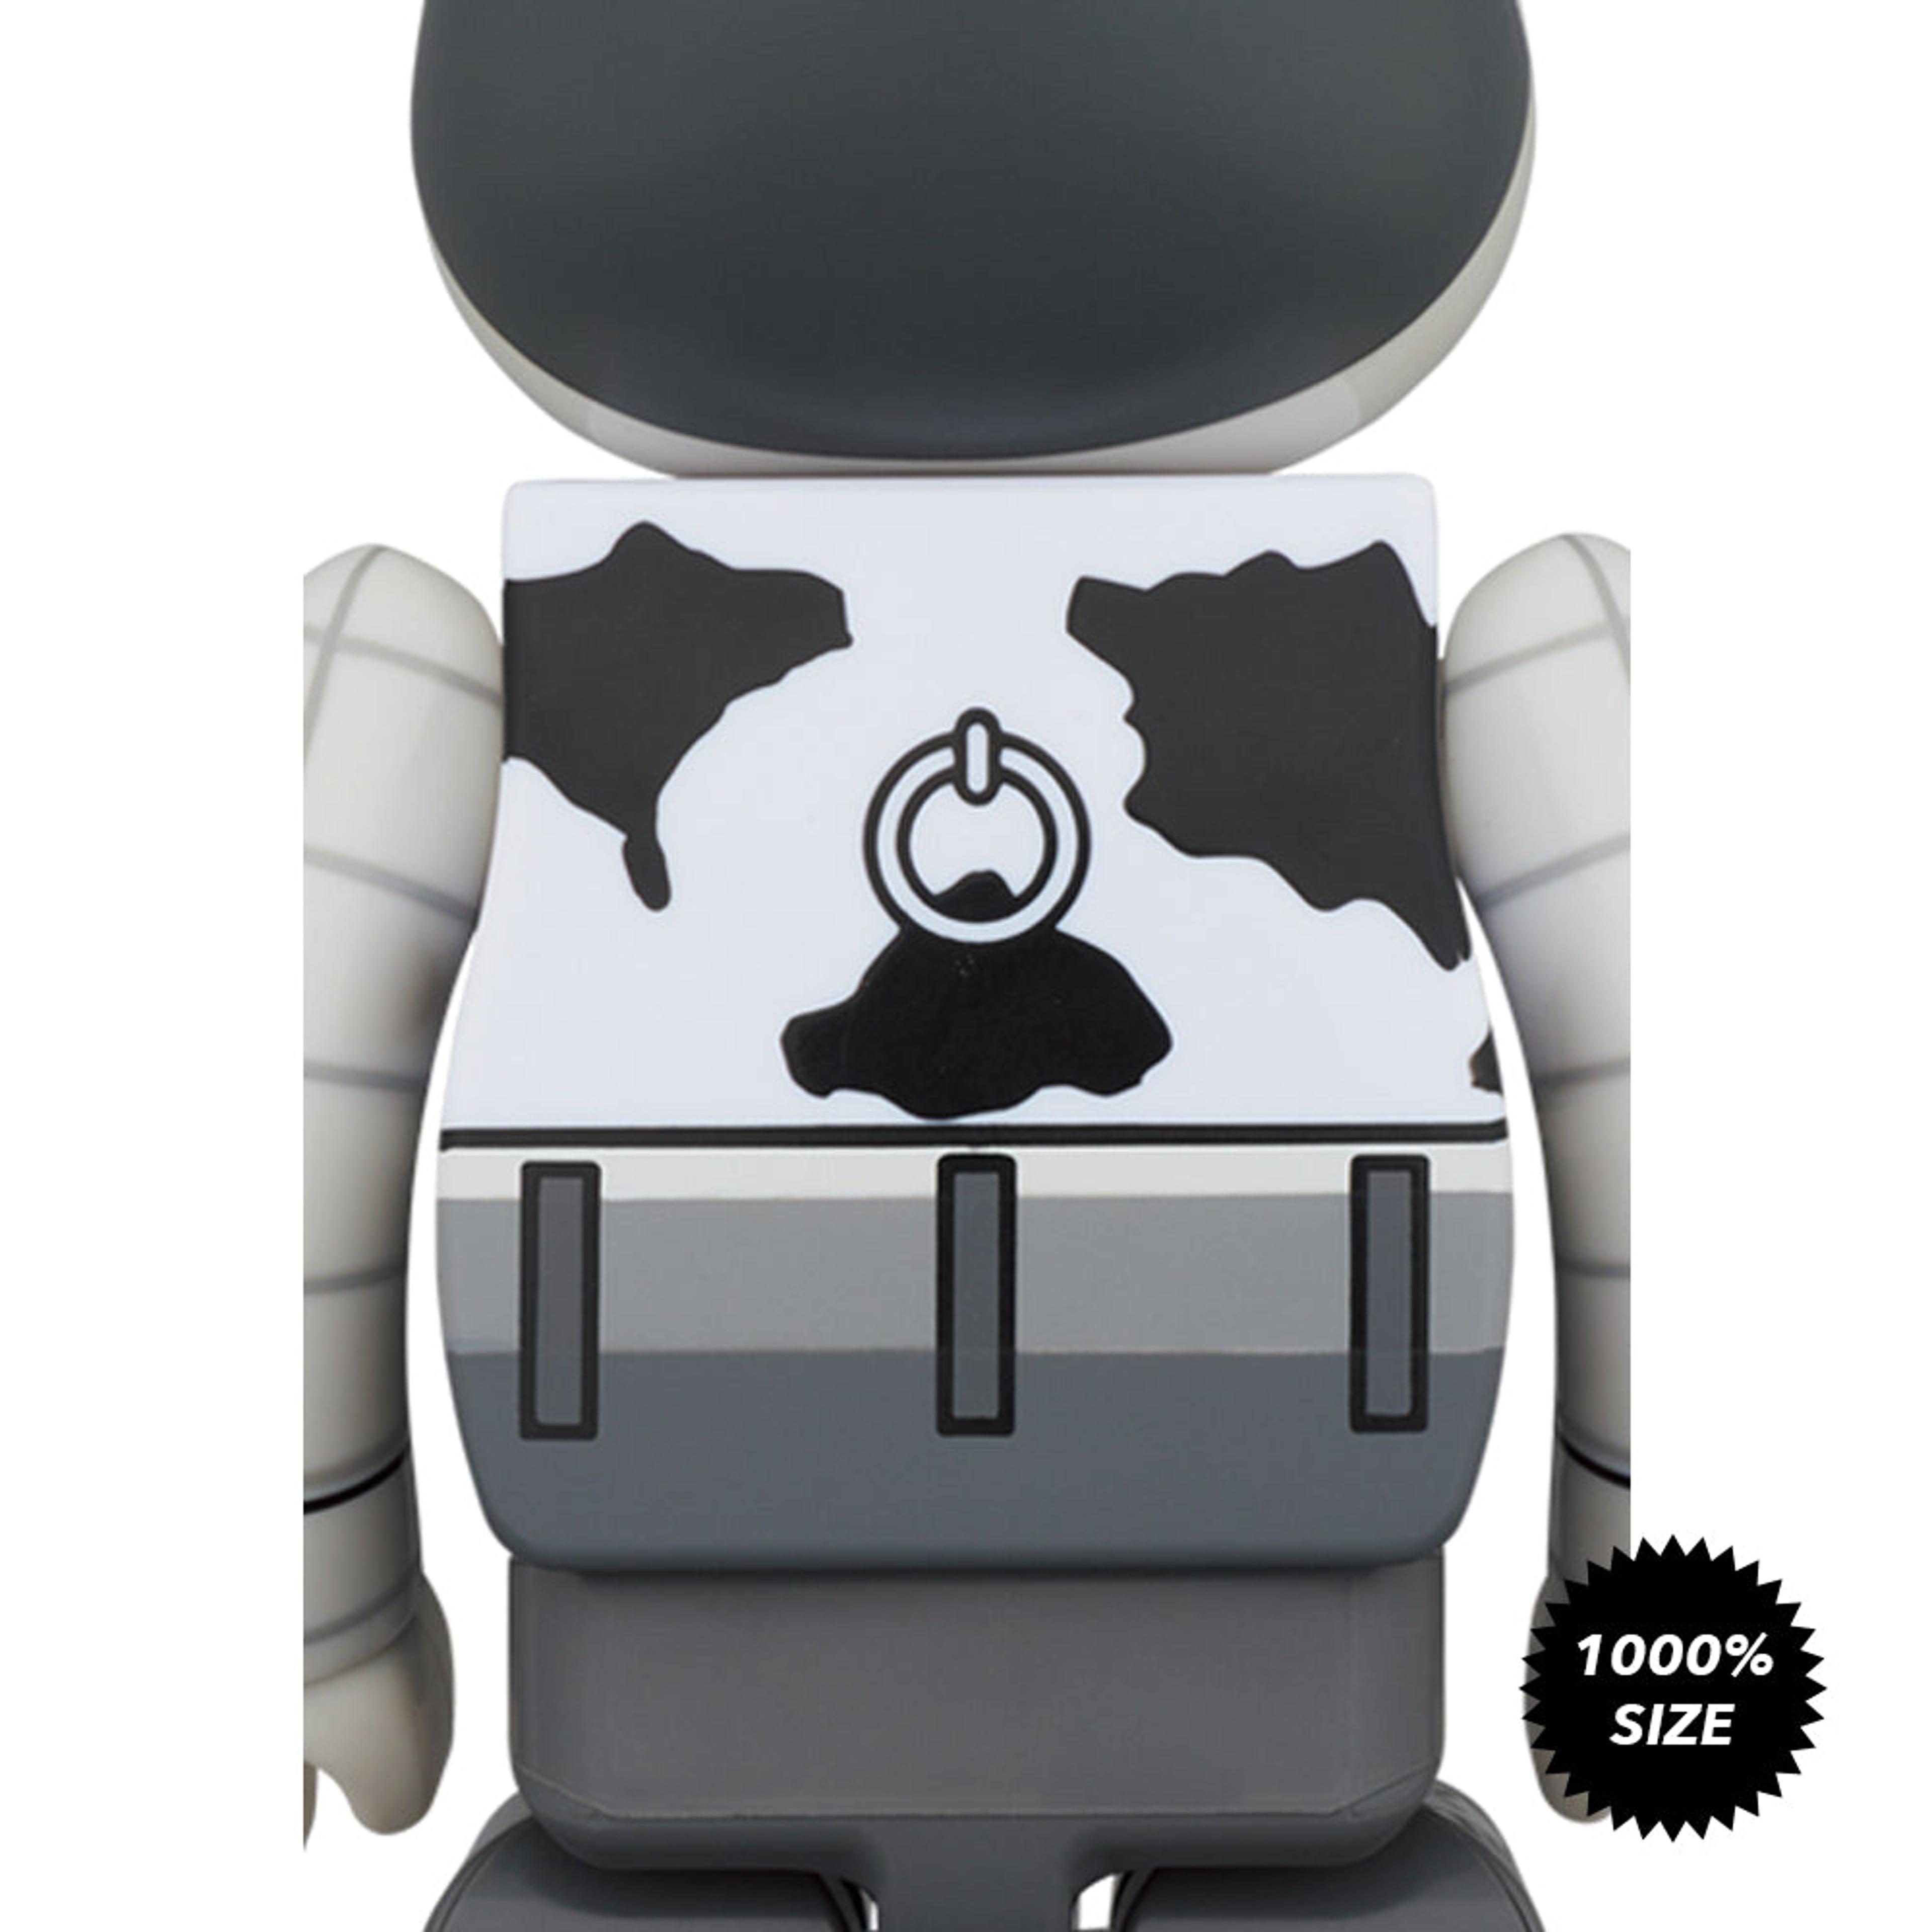 Alternate View 1 of Toy Story Woody (Black and White Version) 1000% Bearbrick by Med